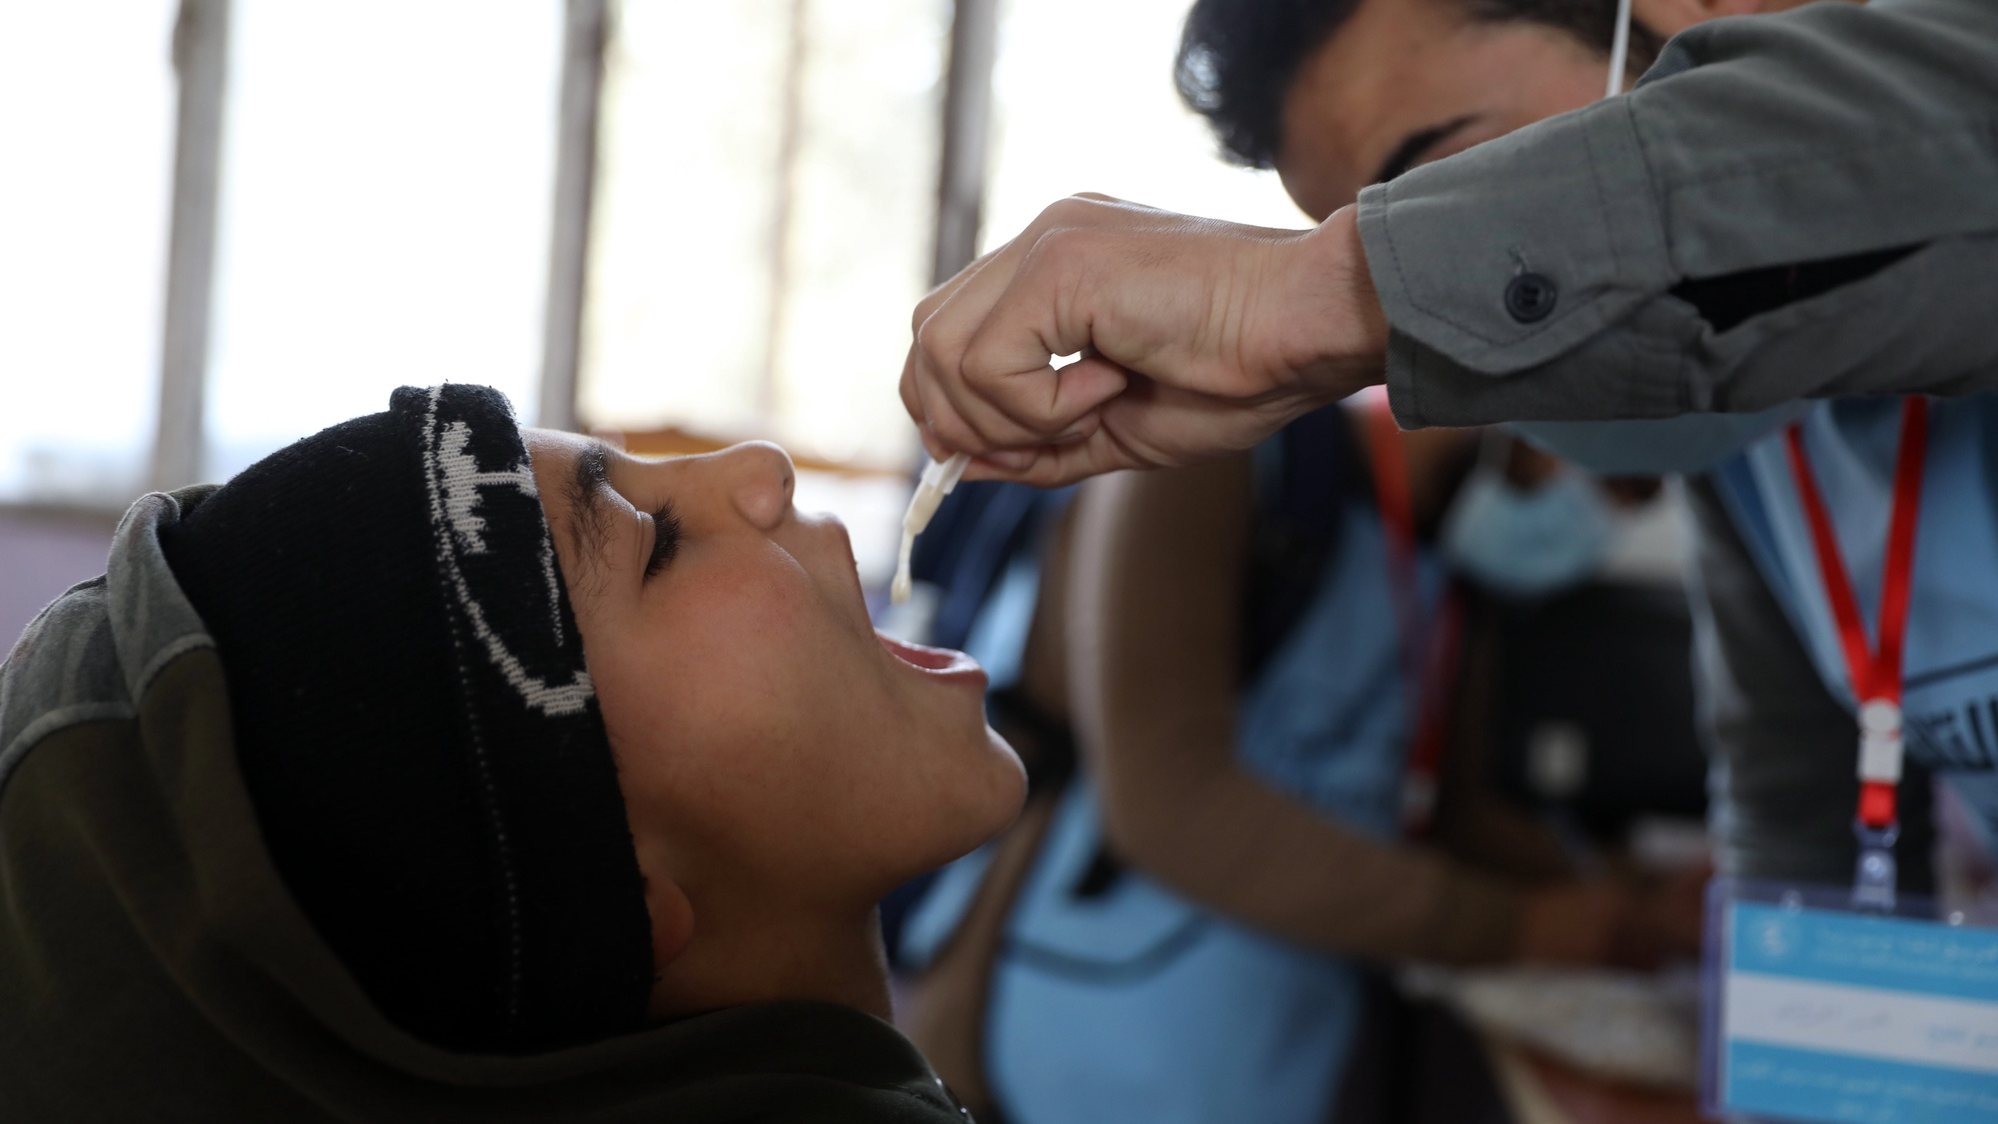 epa10510129 A child gets a cholera vaccination during a vaccination campaign at a school in Maaret Misrin town, Idlib province, Syria, 08 March 2023. The World Health Organization (WHO) said in a statement that a house-to-house 10-day cholera vaccination campaign was launched in earthquake-hit areas of northwest Syria in coordination with the United Nations Children’s Fund (UNICEF) and health authorities in the region, with an aim of giving 1.7 million doses of cholera vaccine to protect Syrians above one year of age, especially those living in the areas most severely impacted by the earthquake. The White Helmets group, the Syrian Civil Defense operating in the area, said on 28 February that the number of cholera deaths in northwestern Syria has risen to 22, with 568 cases of infection, noting that the earthquake on 06 February caused significant damage to infrastructure, water and sewage lines, increasing the risk of a disease outbreak.  EPA/YAHYA NEMAH